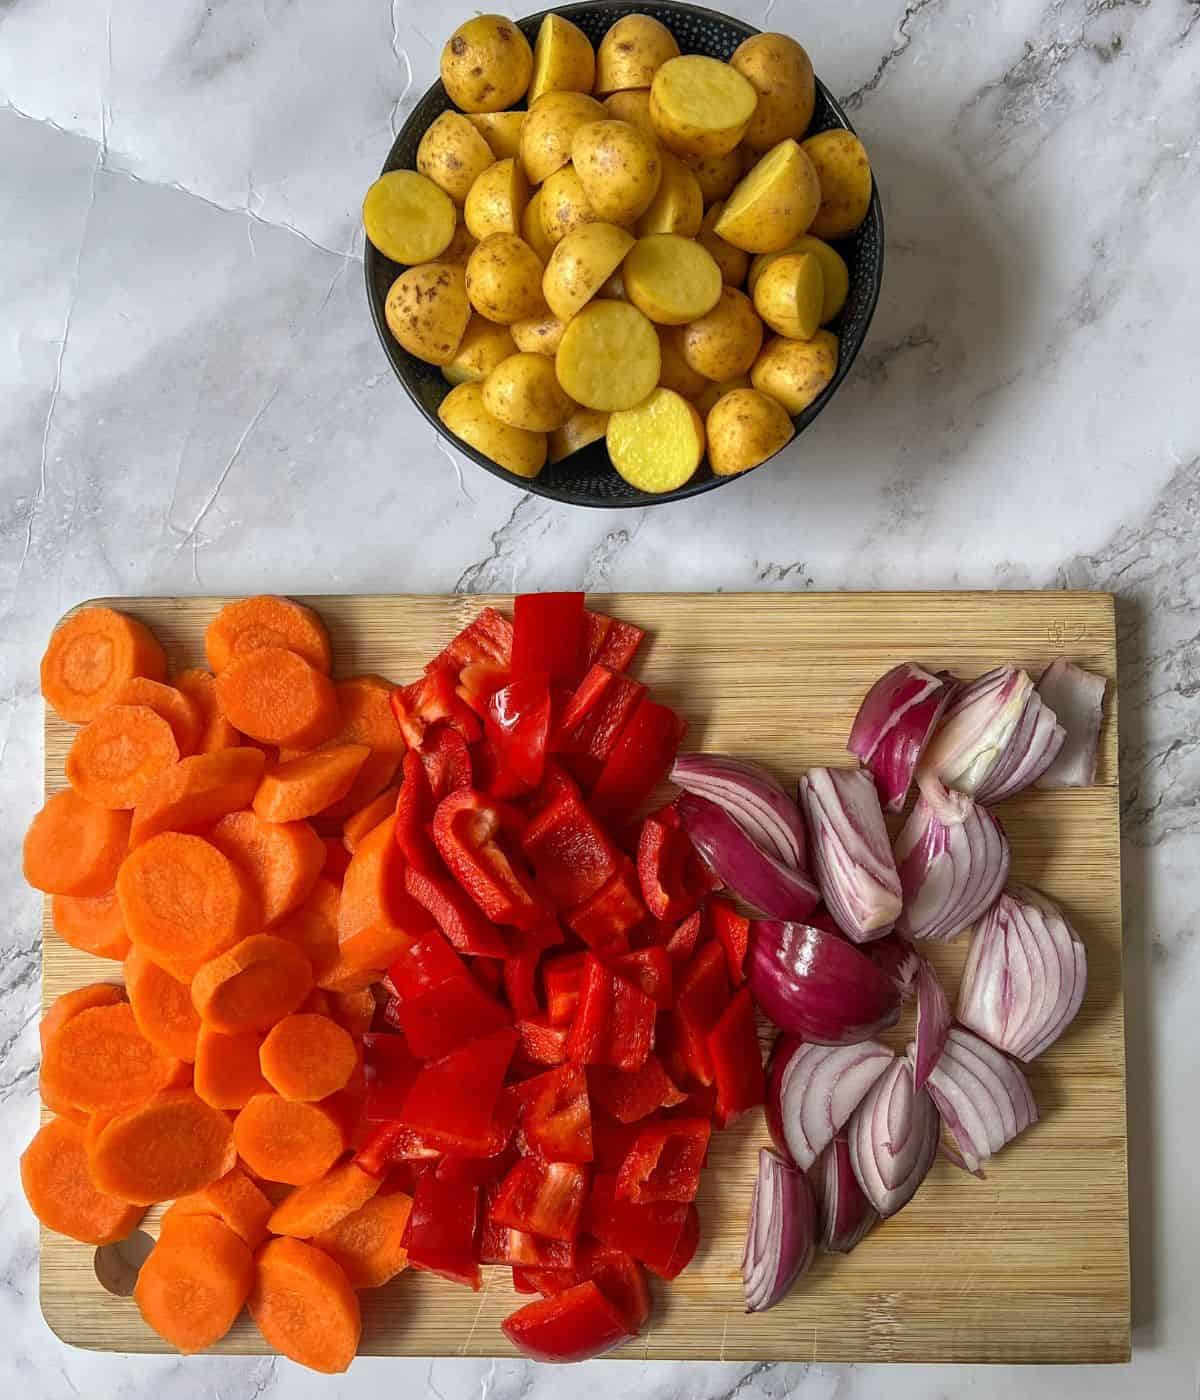 Raw, chopped carrots, red peppers, red onion and baby potatoes.